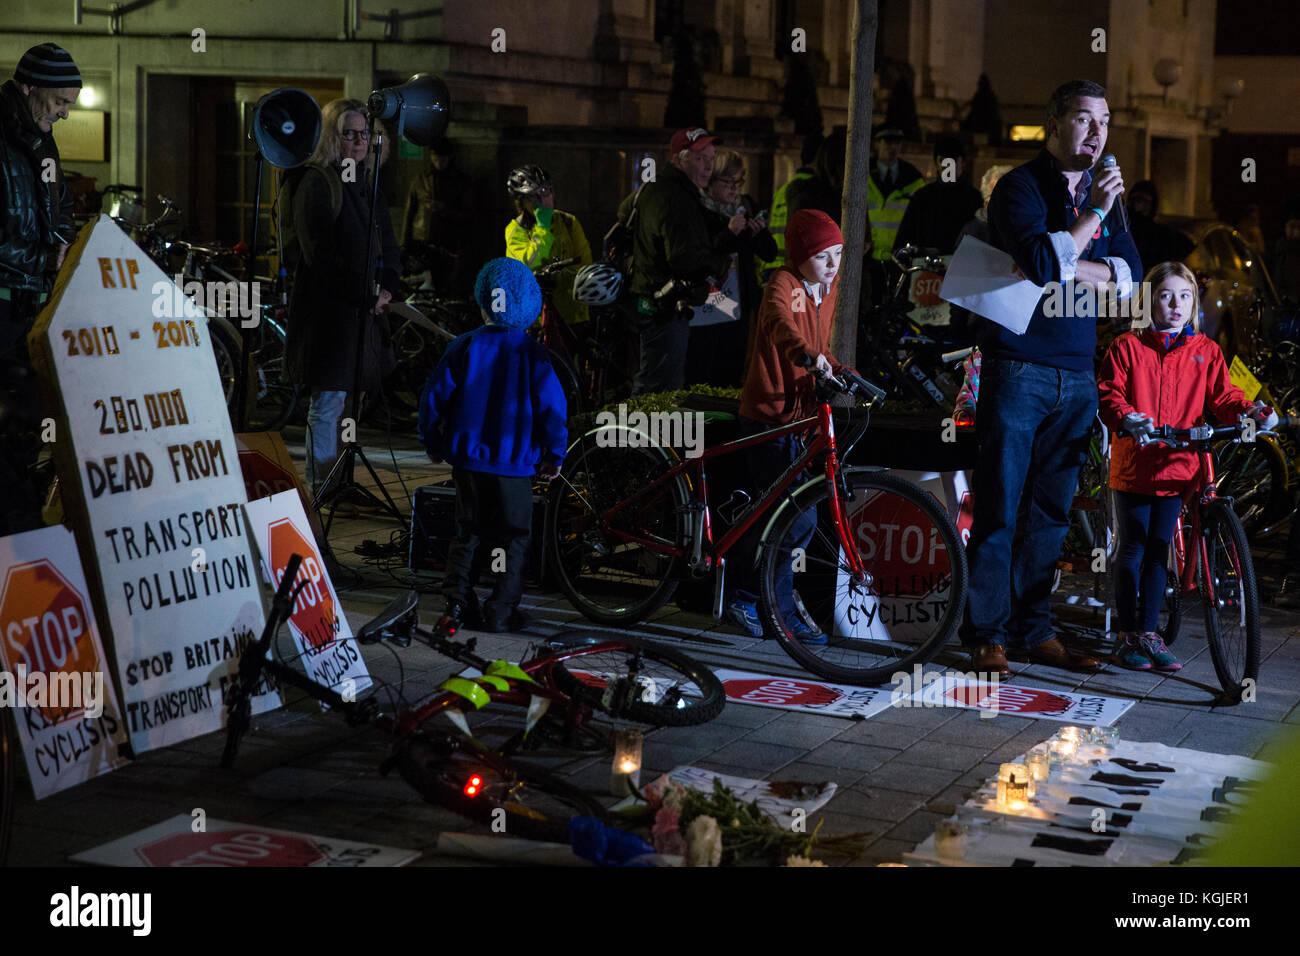 London, UK. 8th November, 2017. Chris Kenyon, local resident, addresses campaigners from Stop Killing Cyclists holding a vigil for Jerome Roussel outside Islington town hall. Jerome Roussel was  a 51-year-old cyclist who died in hospital on 25th June, seven weeks after a cycling accident on Pentonville Road. An inquest into his death was due to be held today. Credit: Mark Kerrison/Alamy Live News Stock Photo